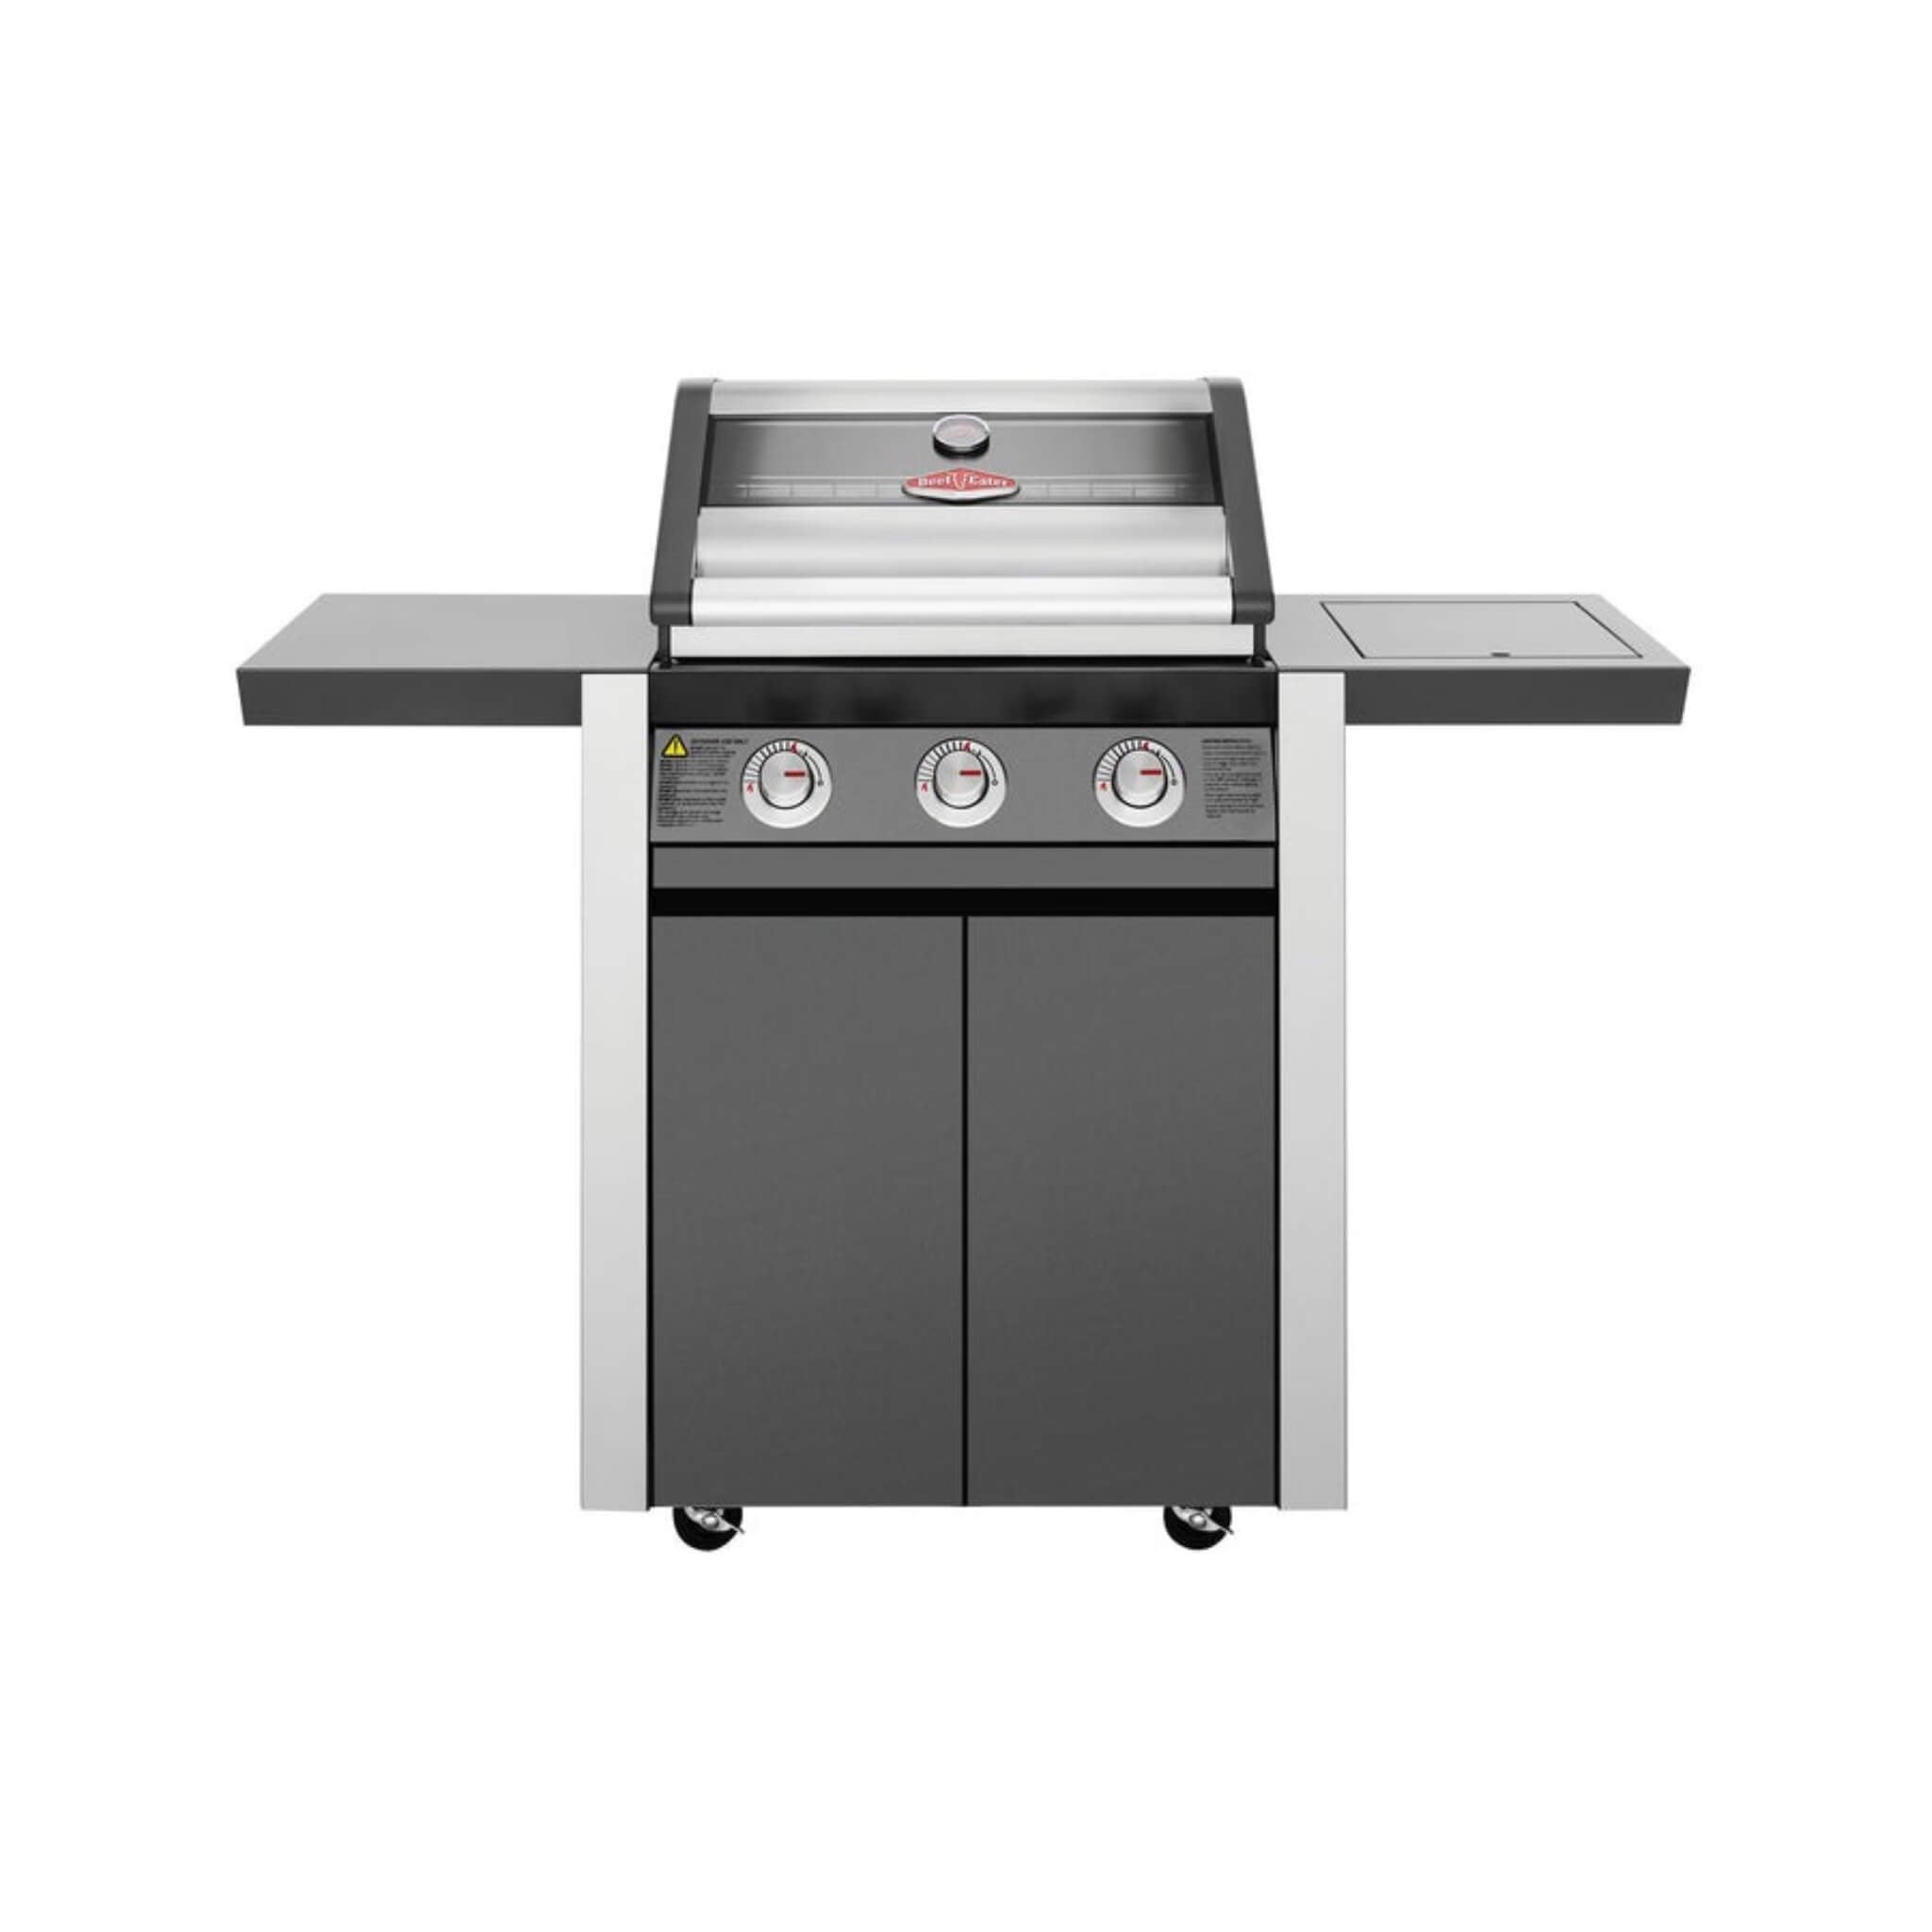 BeefEater Discovery 1600E Series - 3 Burner Built In Gas BBQ - TROLLY ONLY (Dark Grey Enamel or Stainless Steel)